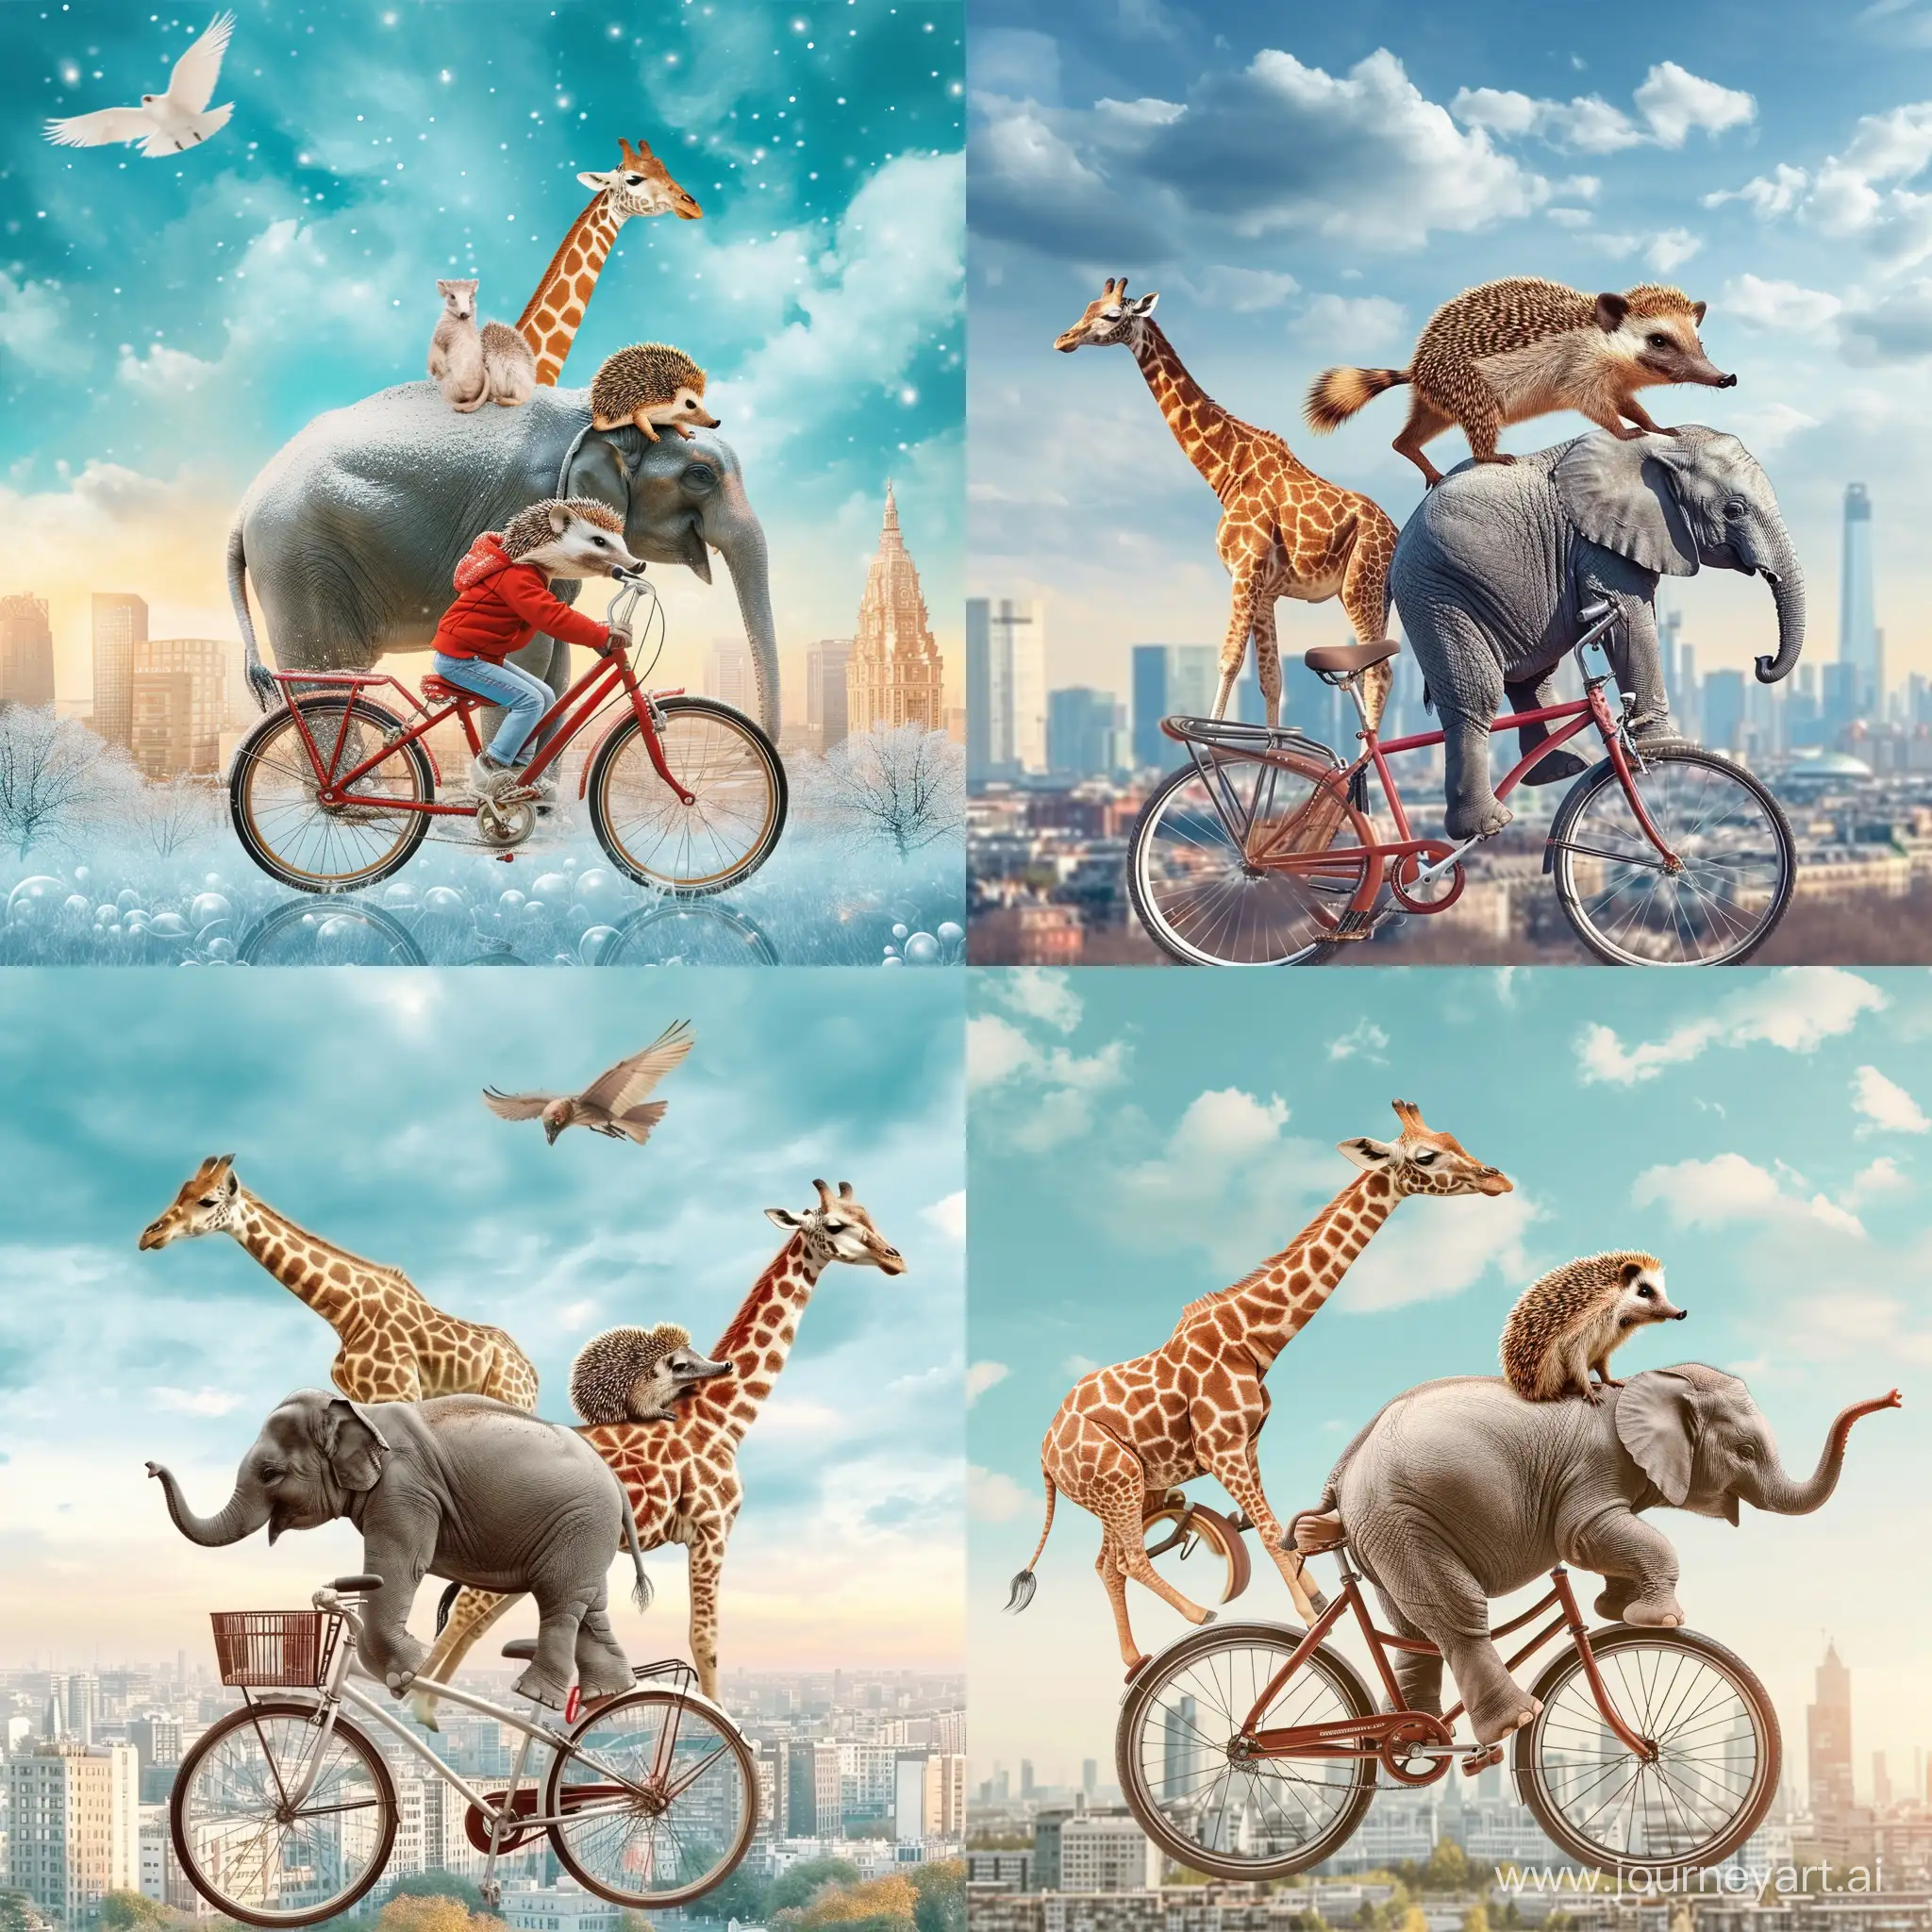 Adorable-Animal-Parade-Elephant-Giraffe-and-Hedgehog-on-a-Bicycle-in-Cityscape-and-Sky